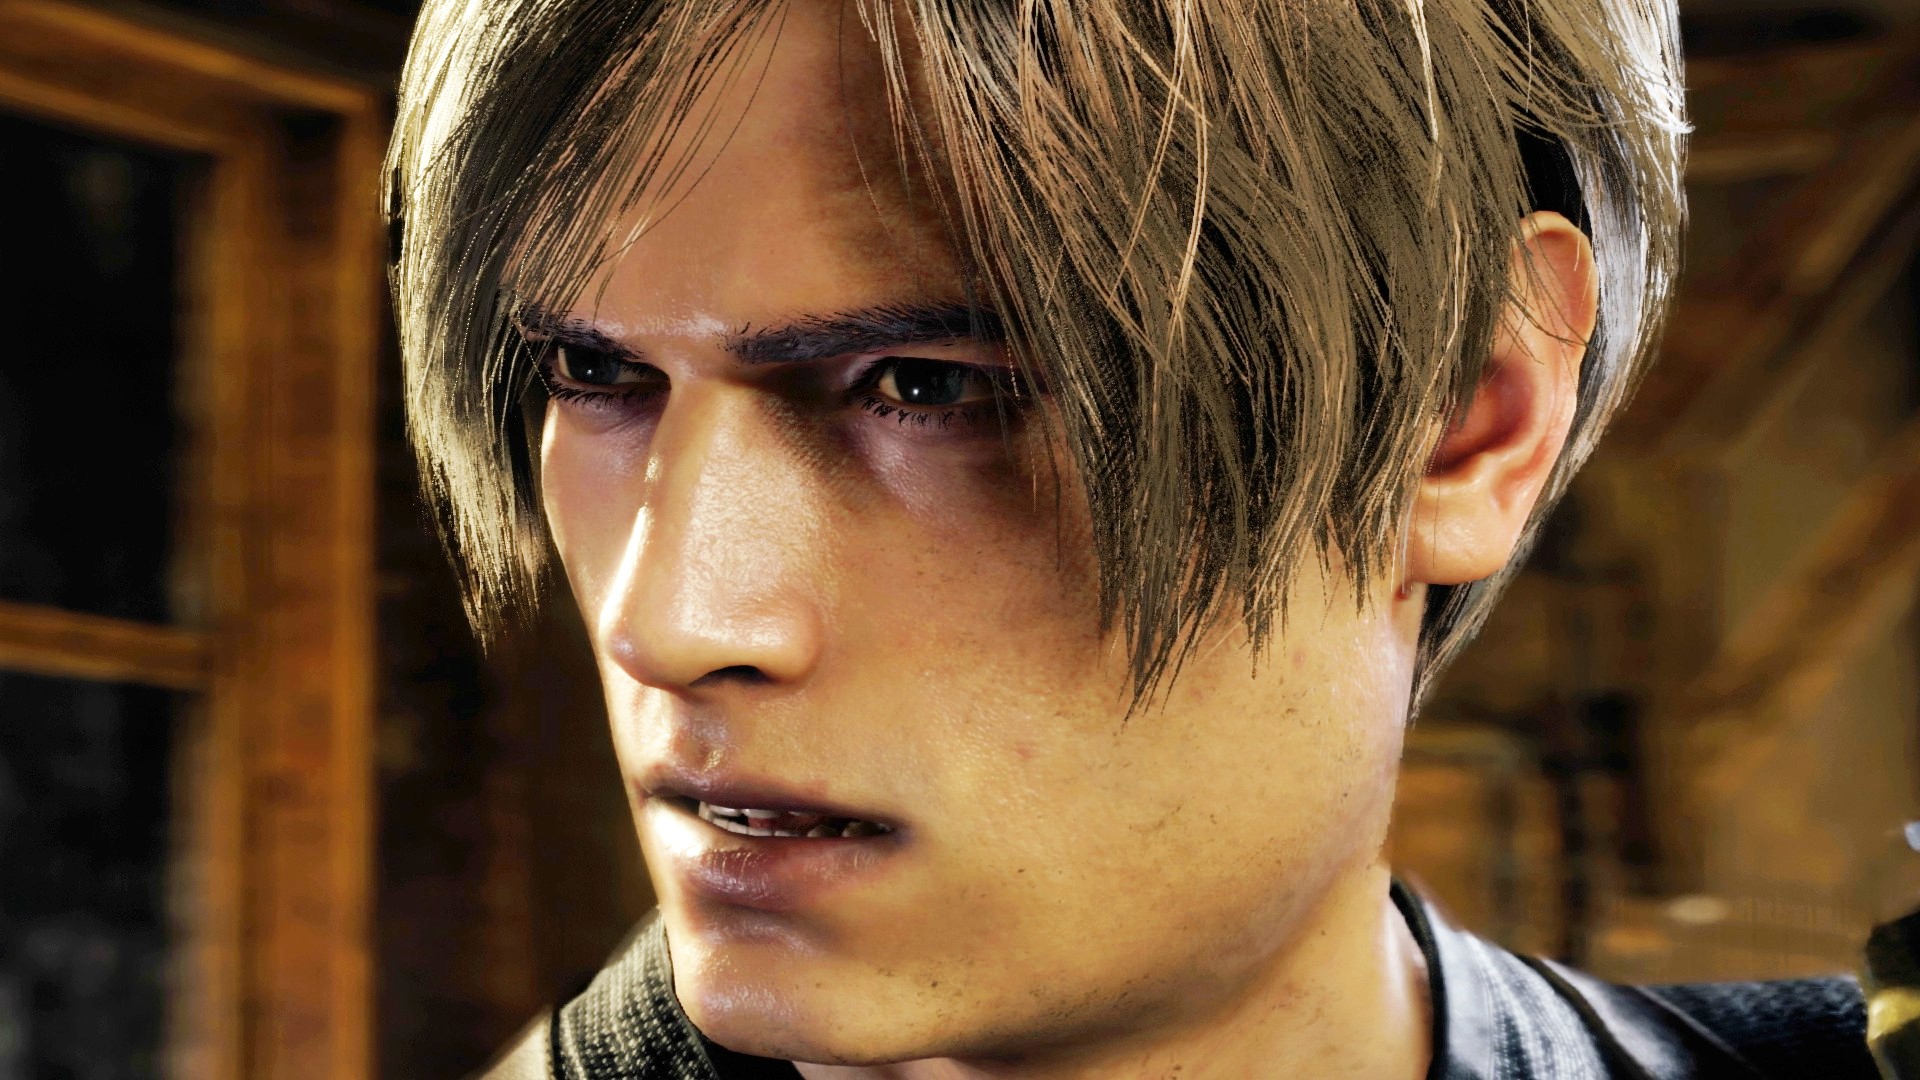 Get Resident Evil 4 Remake for 15% off – here’s the best deal